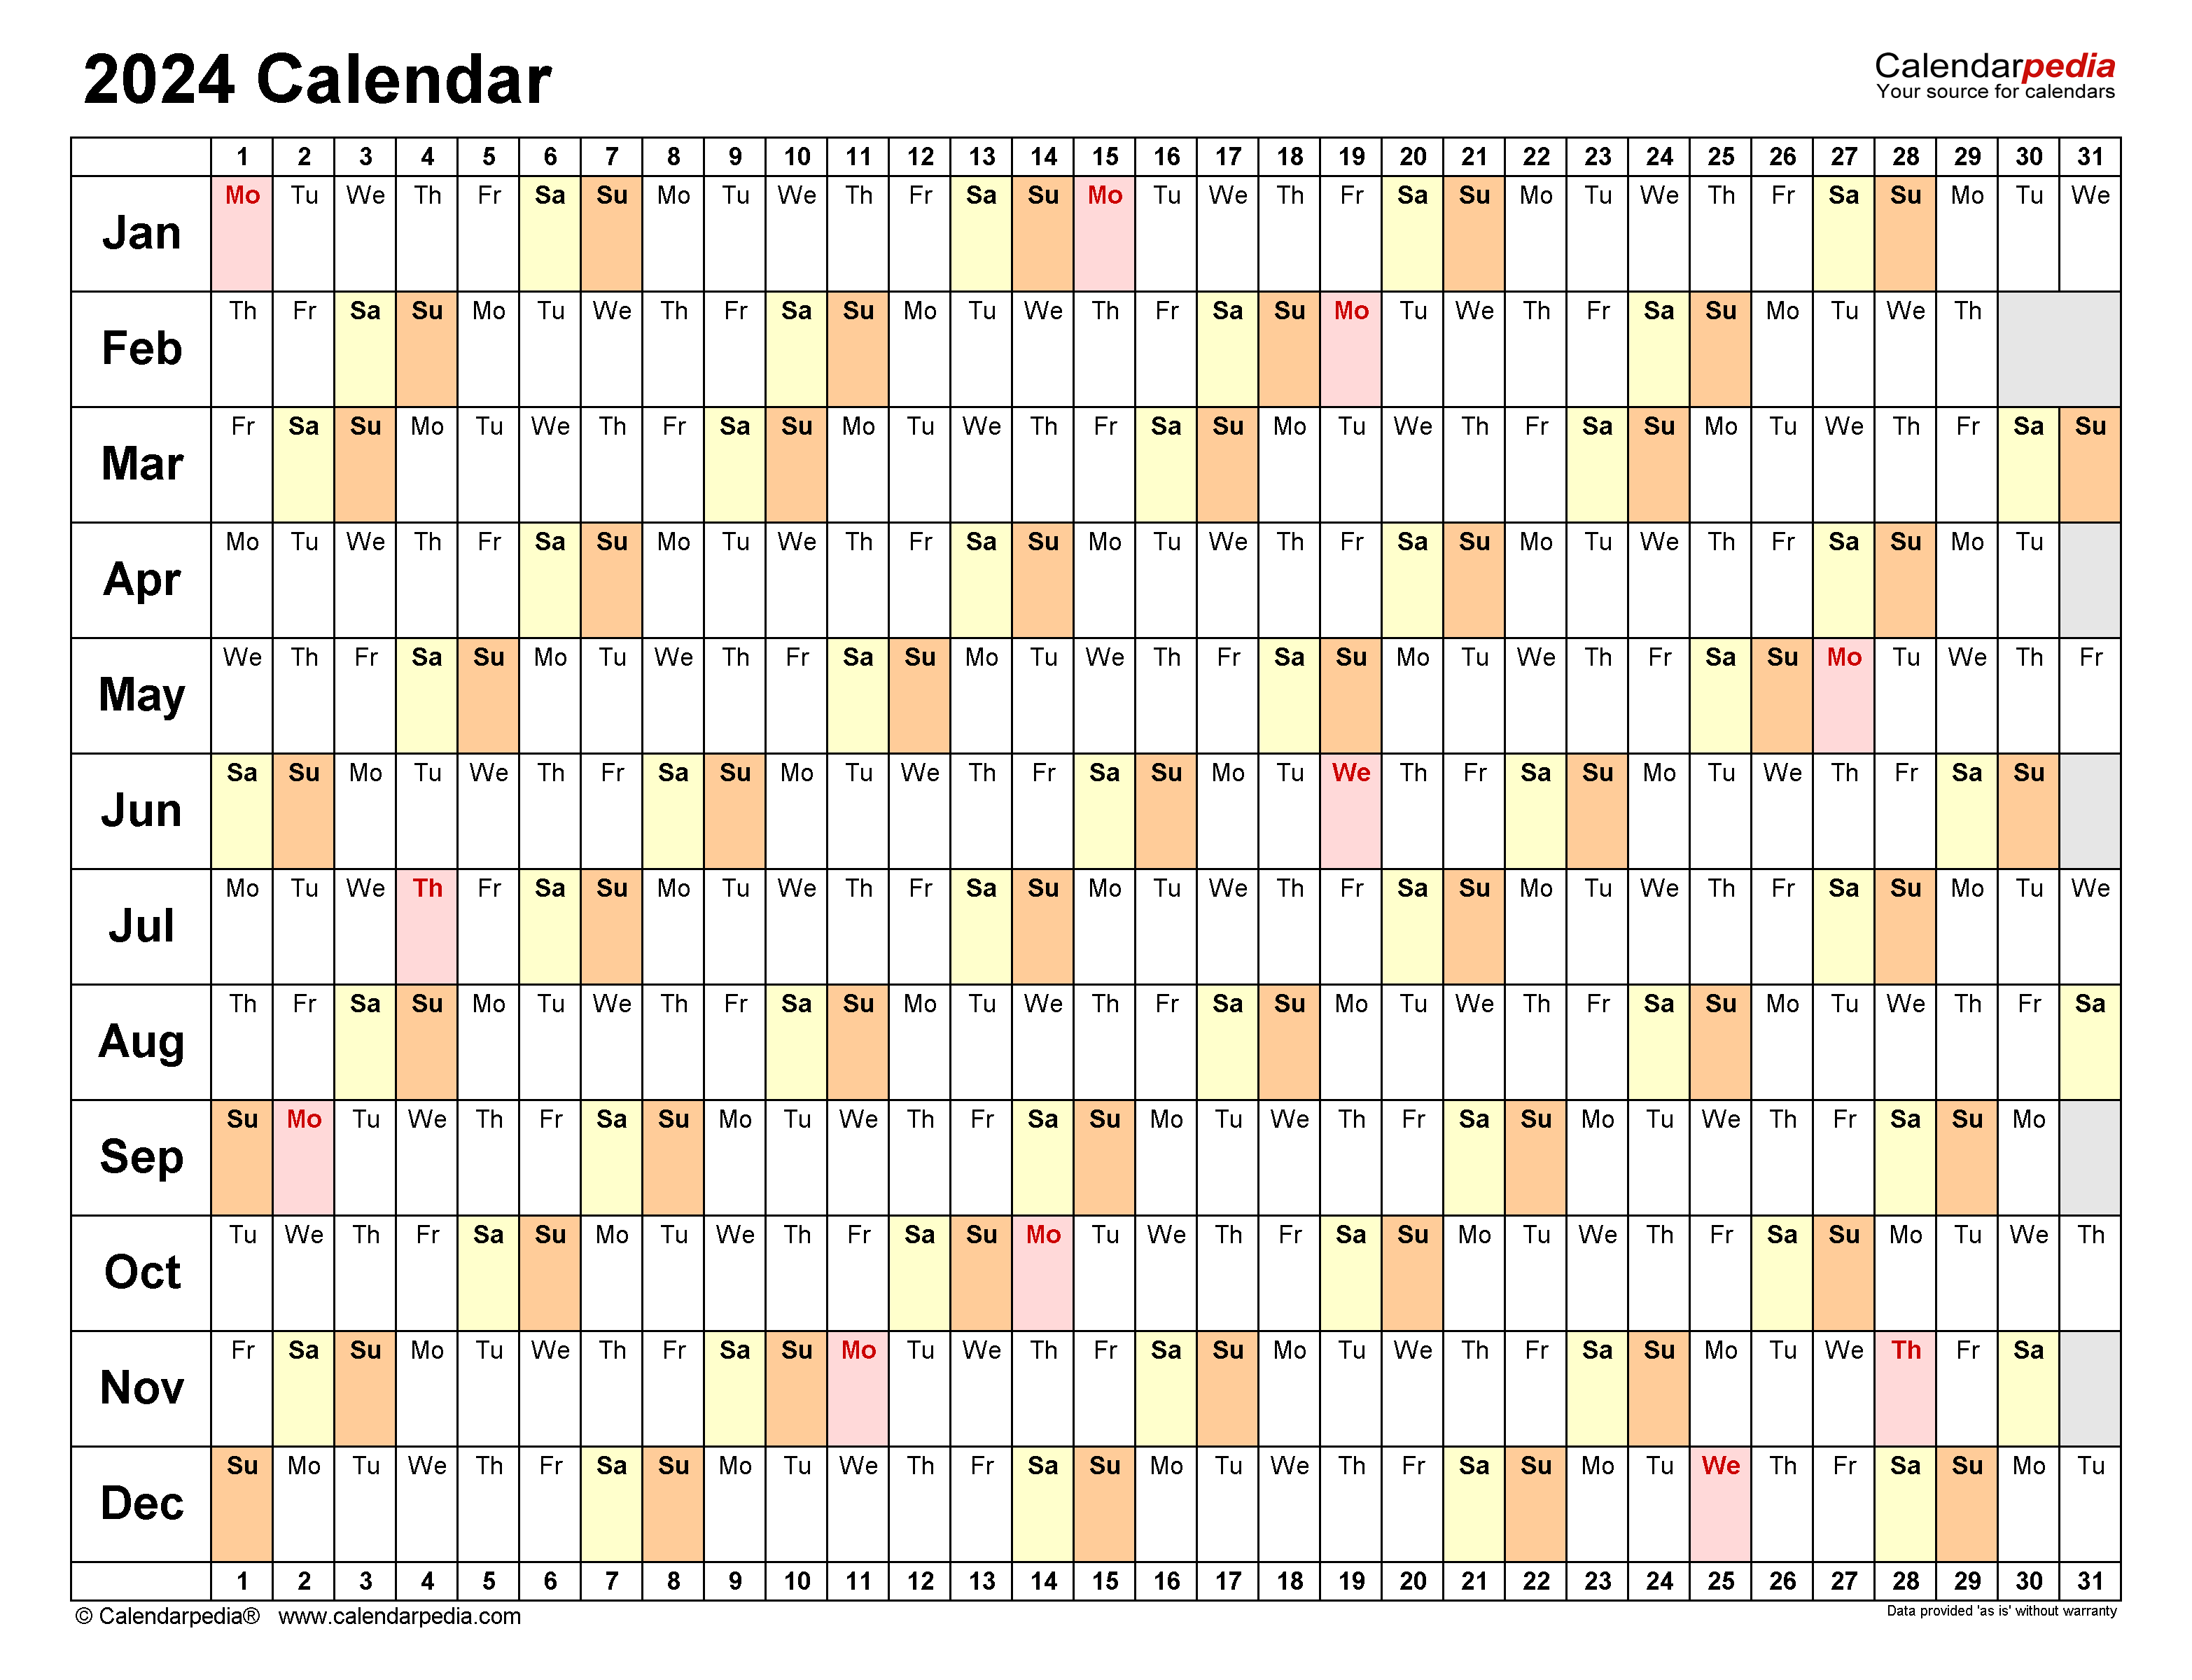 How To Create A 2024 Calendar In Excel Formatting 2024 Calendar With